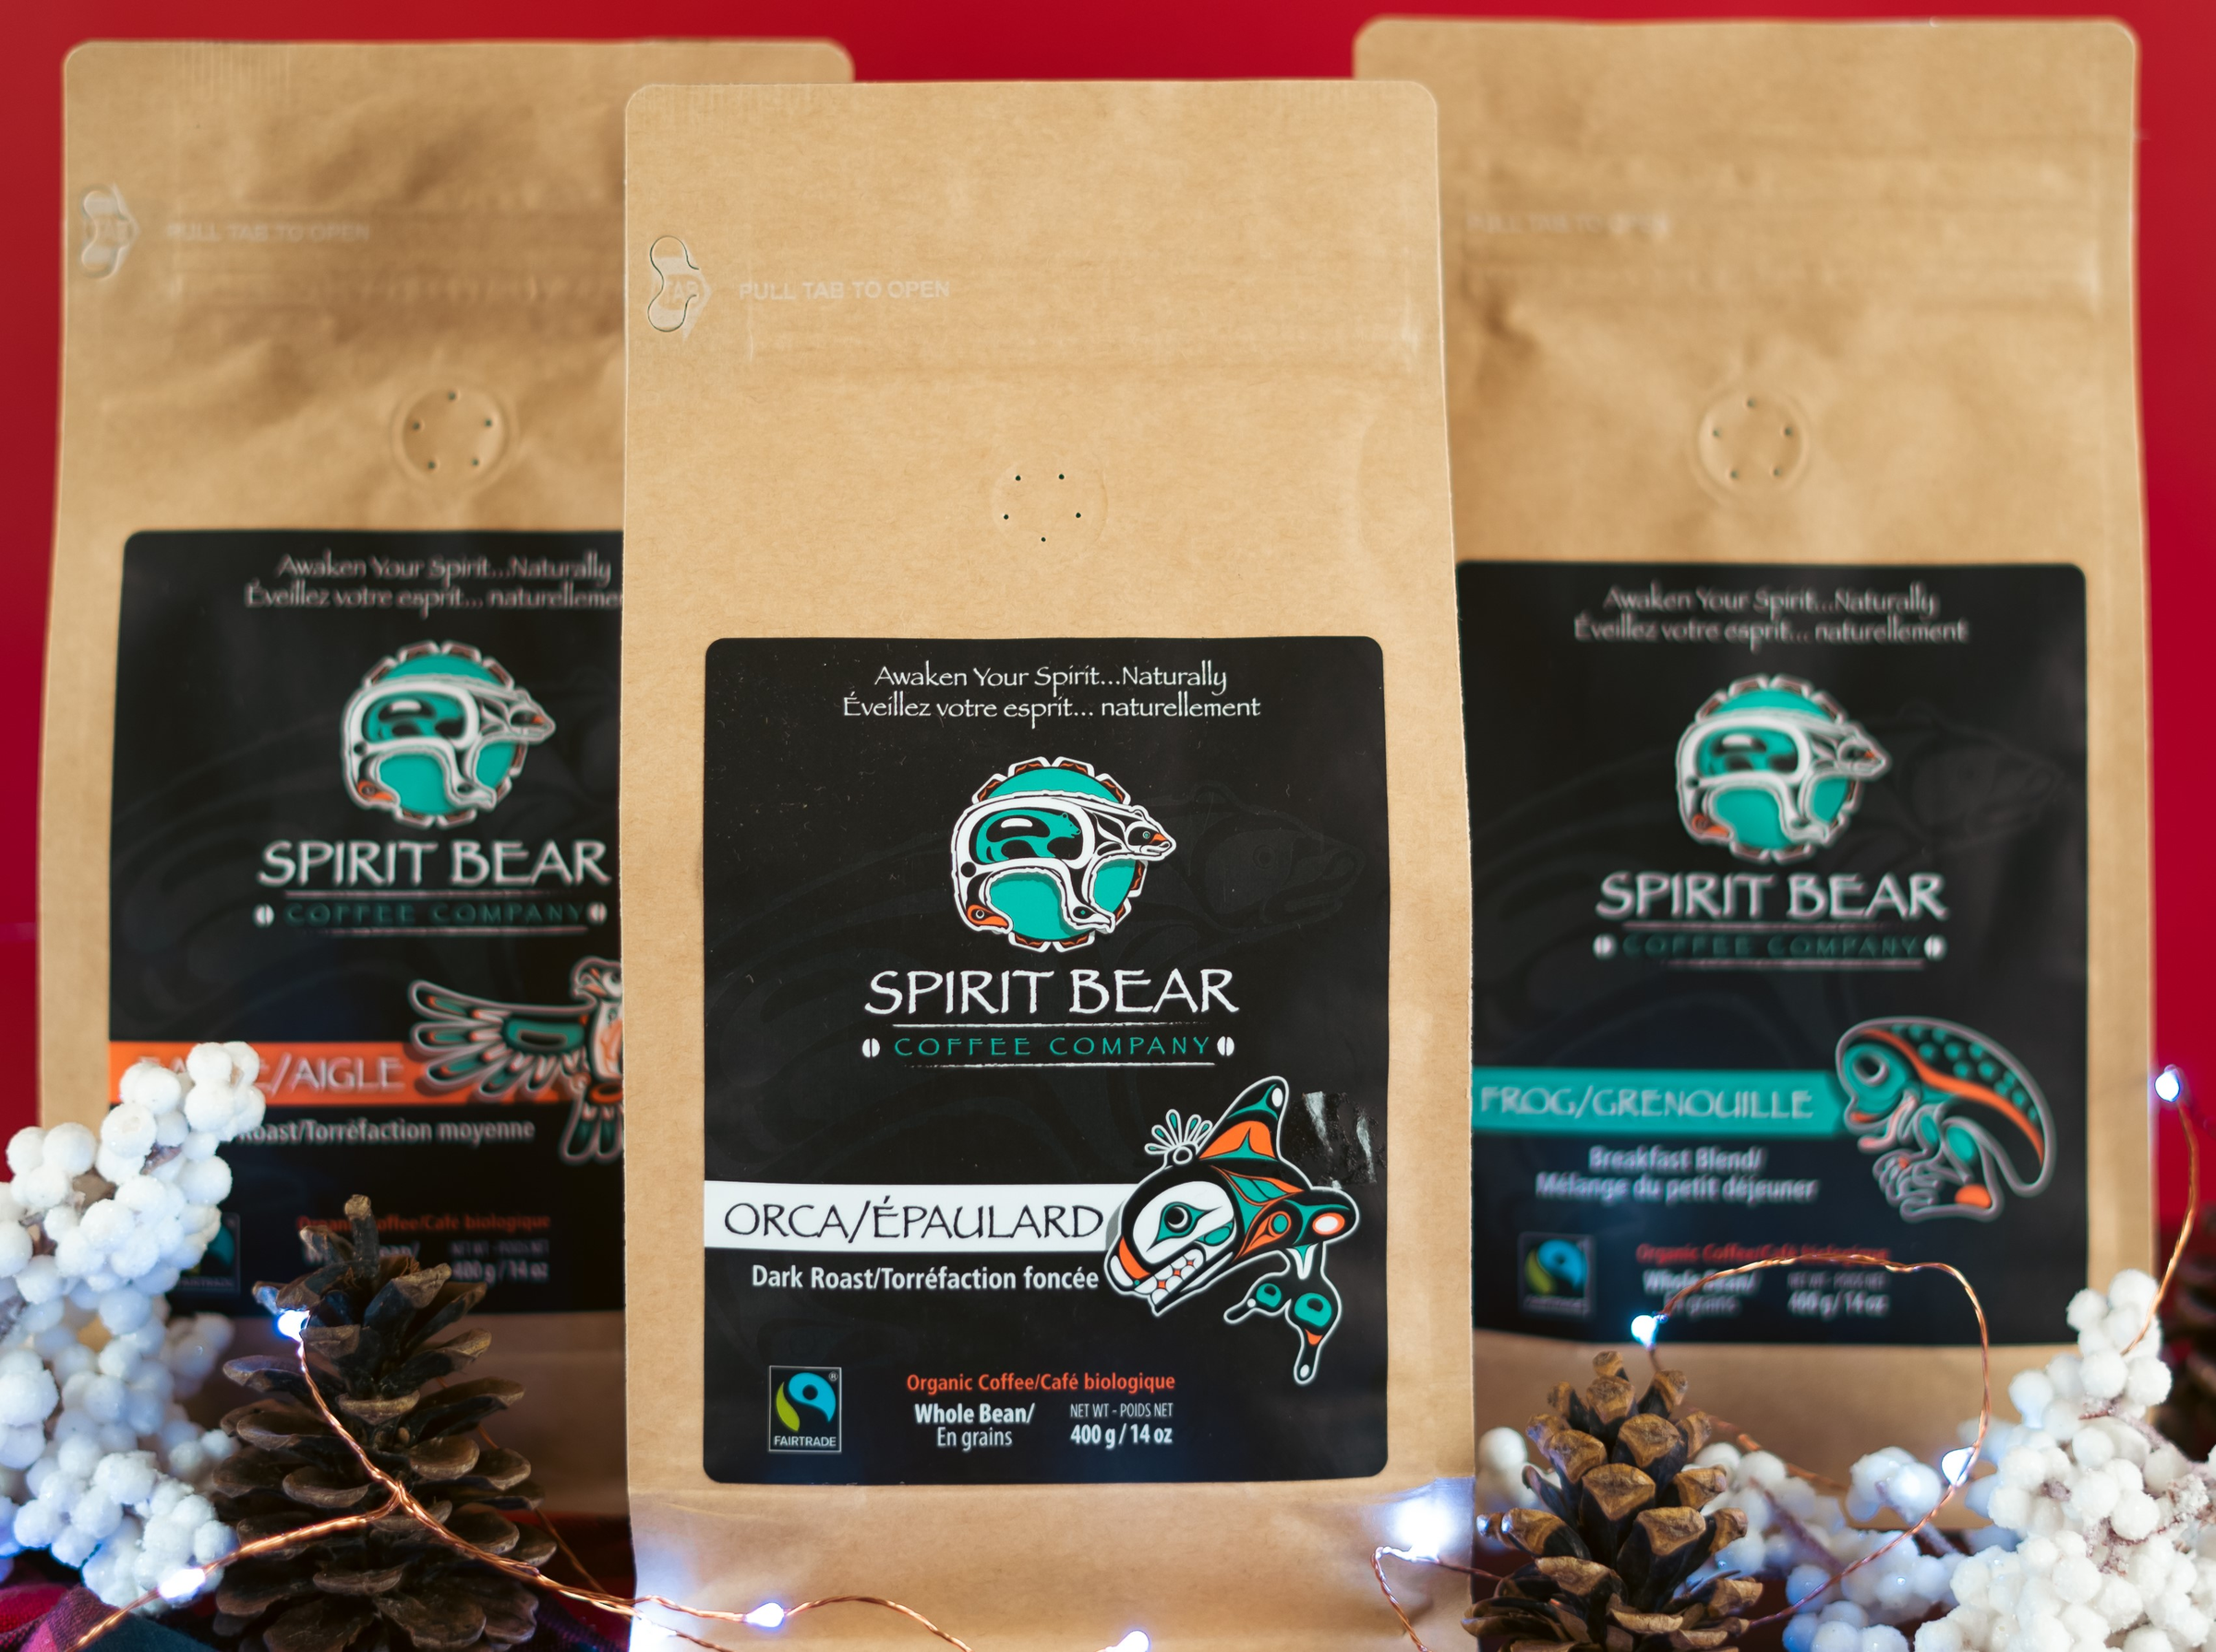 Spirit Bear Coffee holiday collection of First Nations gifts